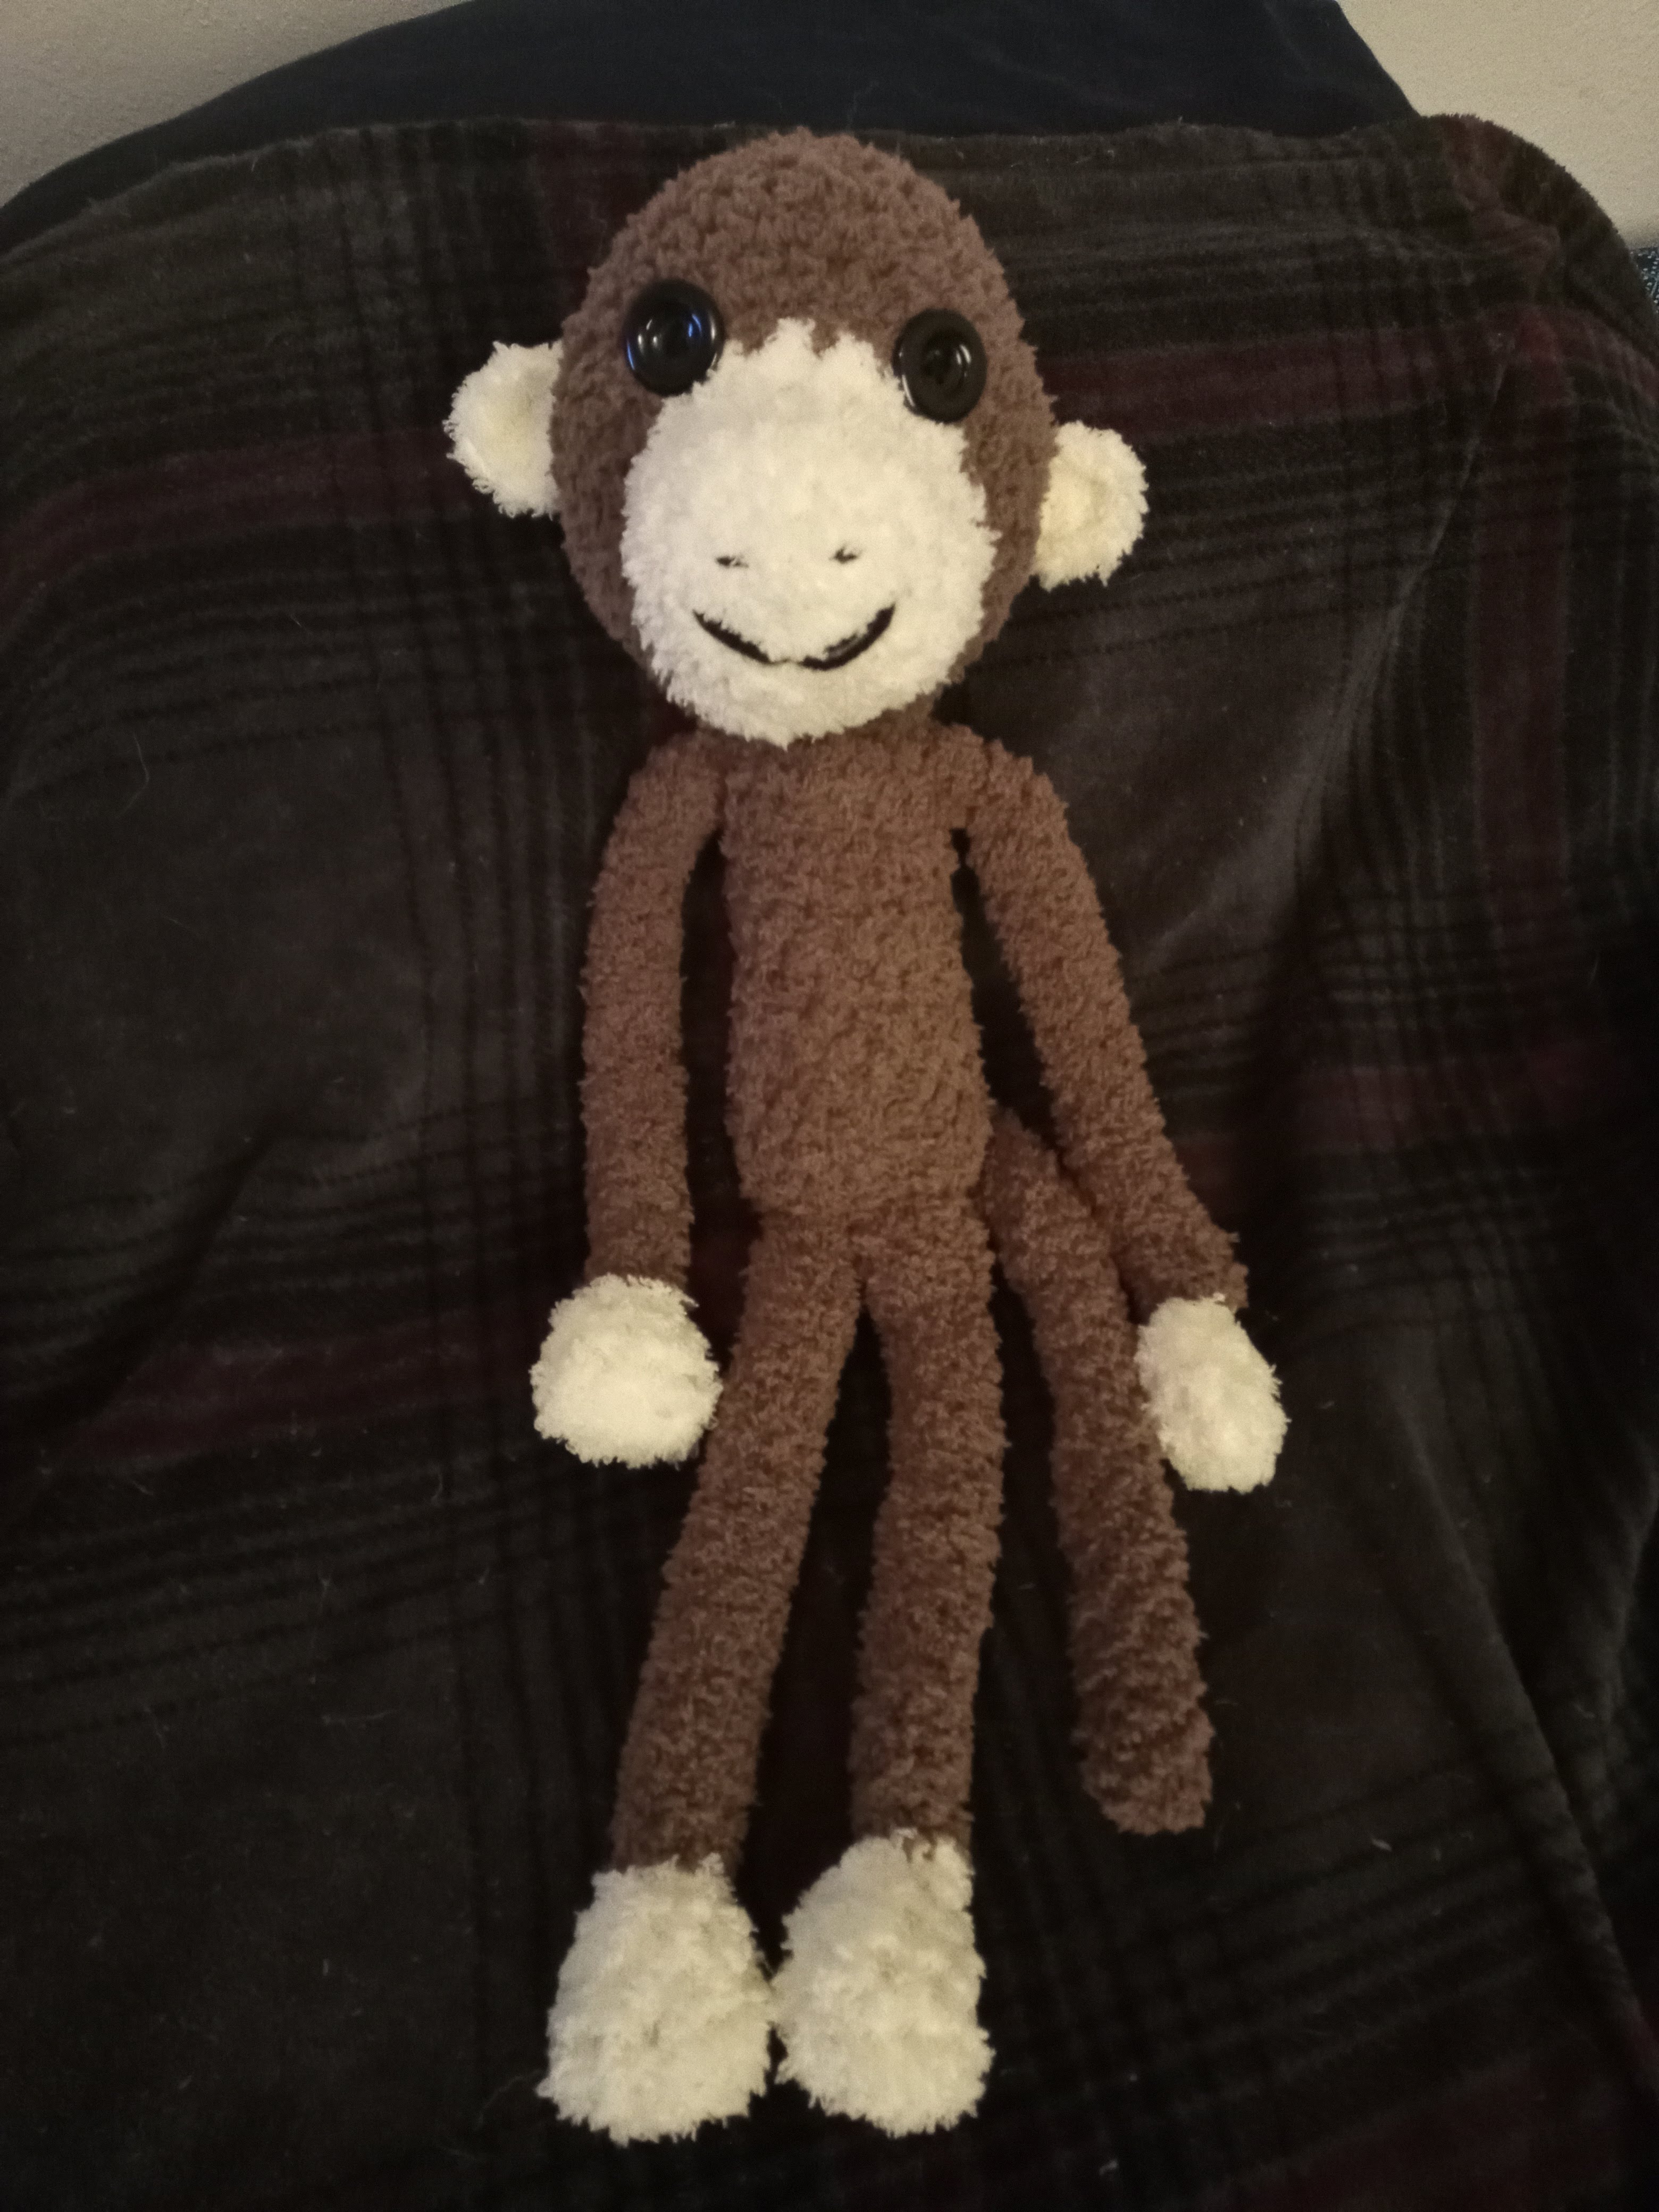 a crocheted brown and tan monkey with black button eyes laying on a brown plaid blanket